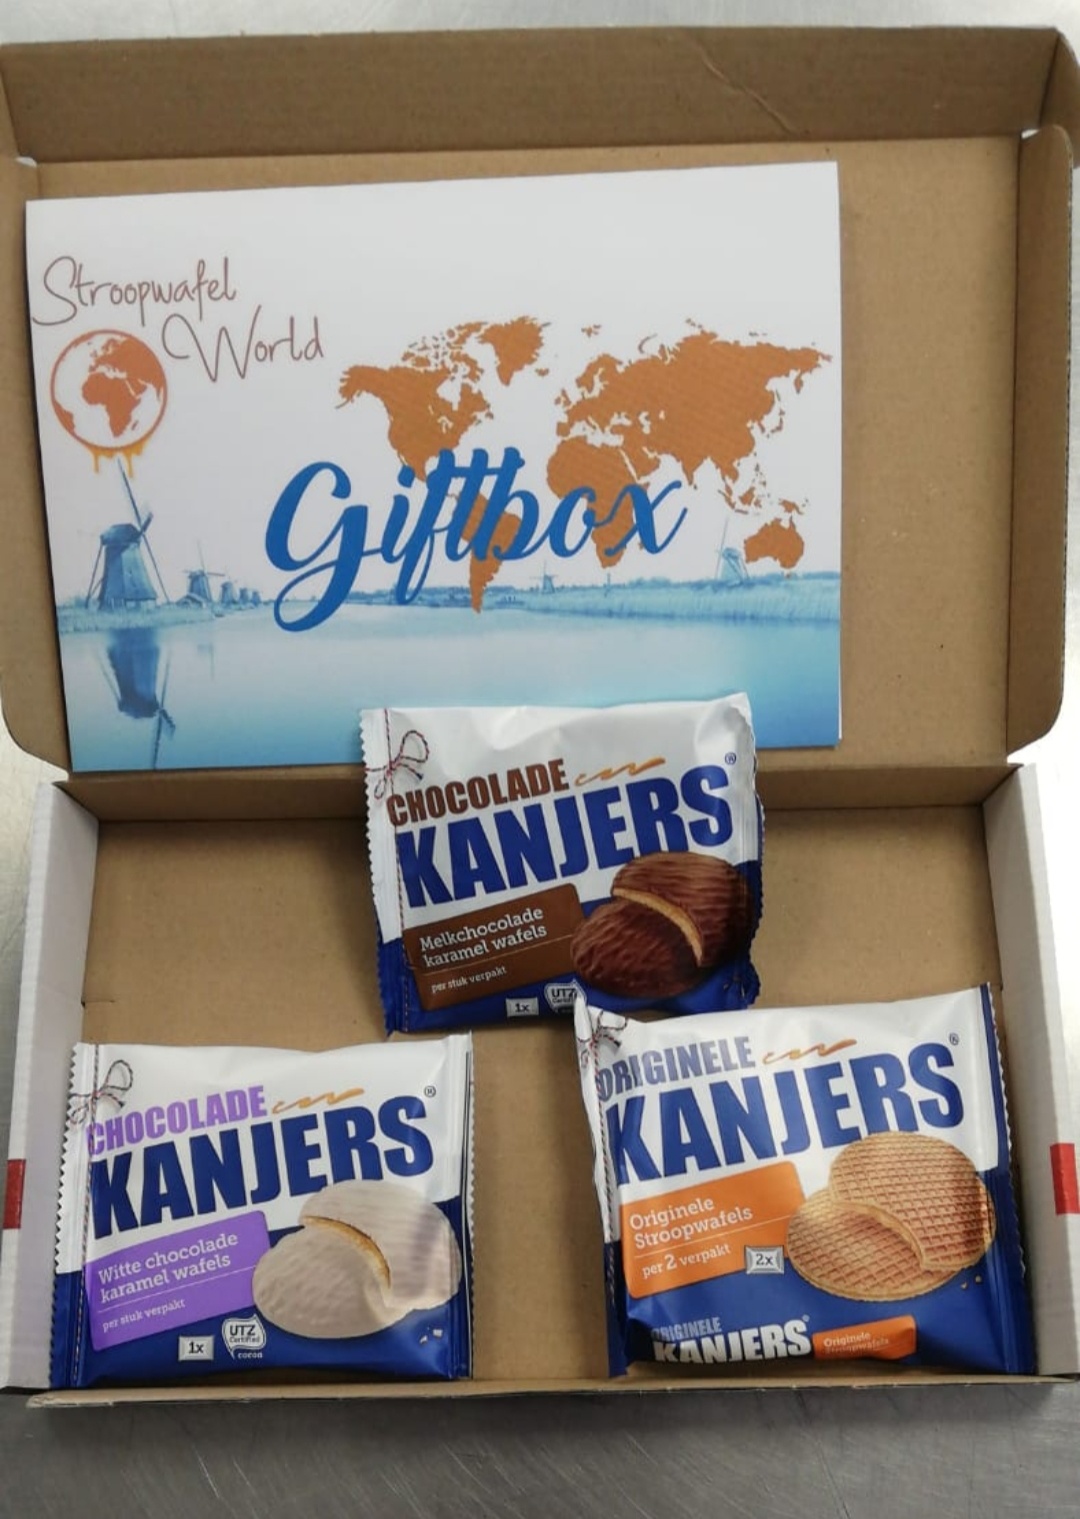 Klein kanjers promo kopen - Stroopwafel World - Sharing the stroopwafel with the World